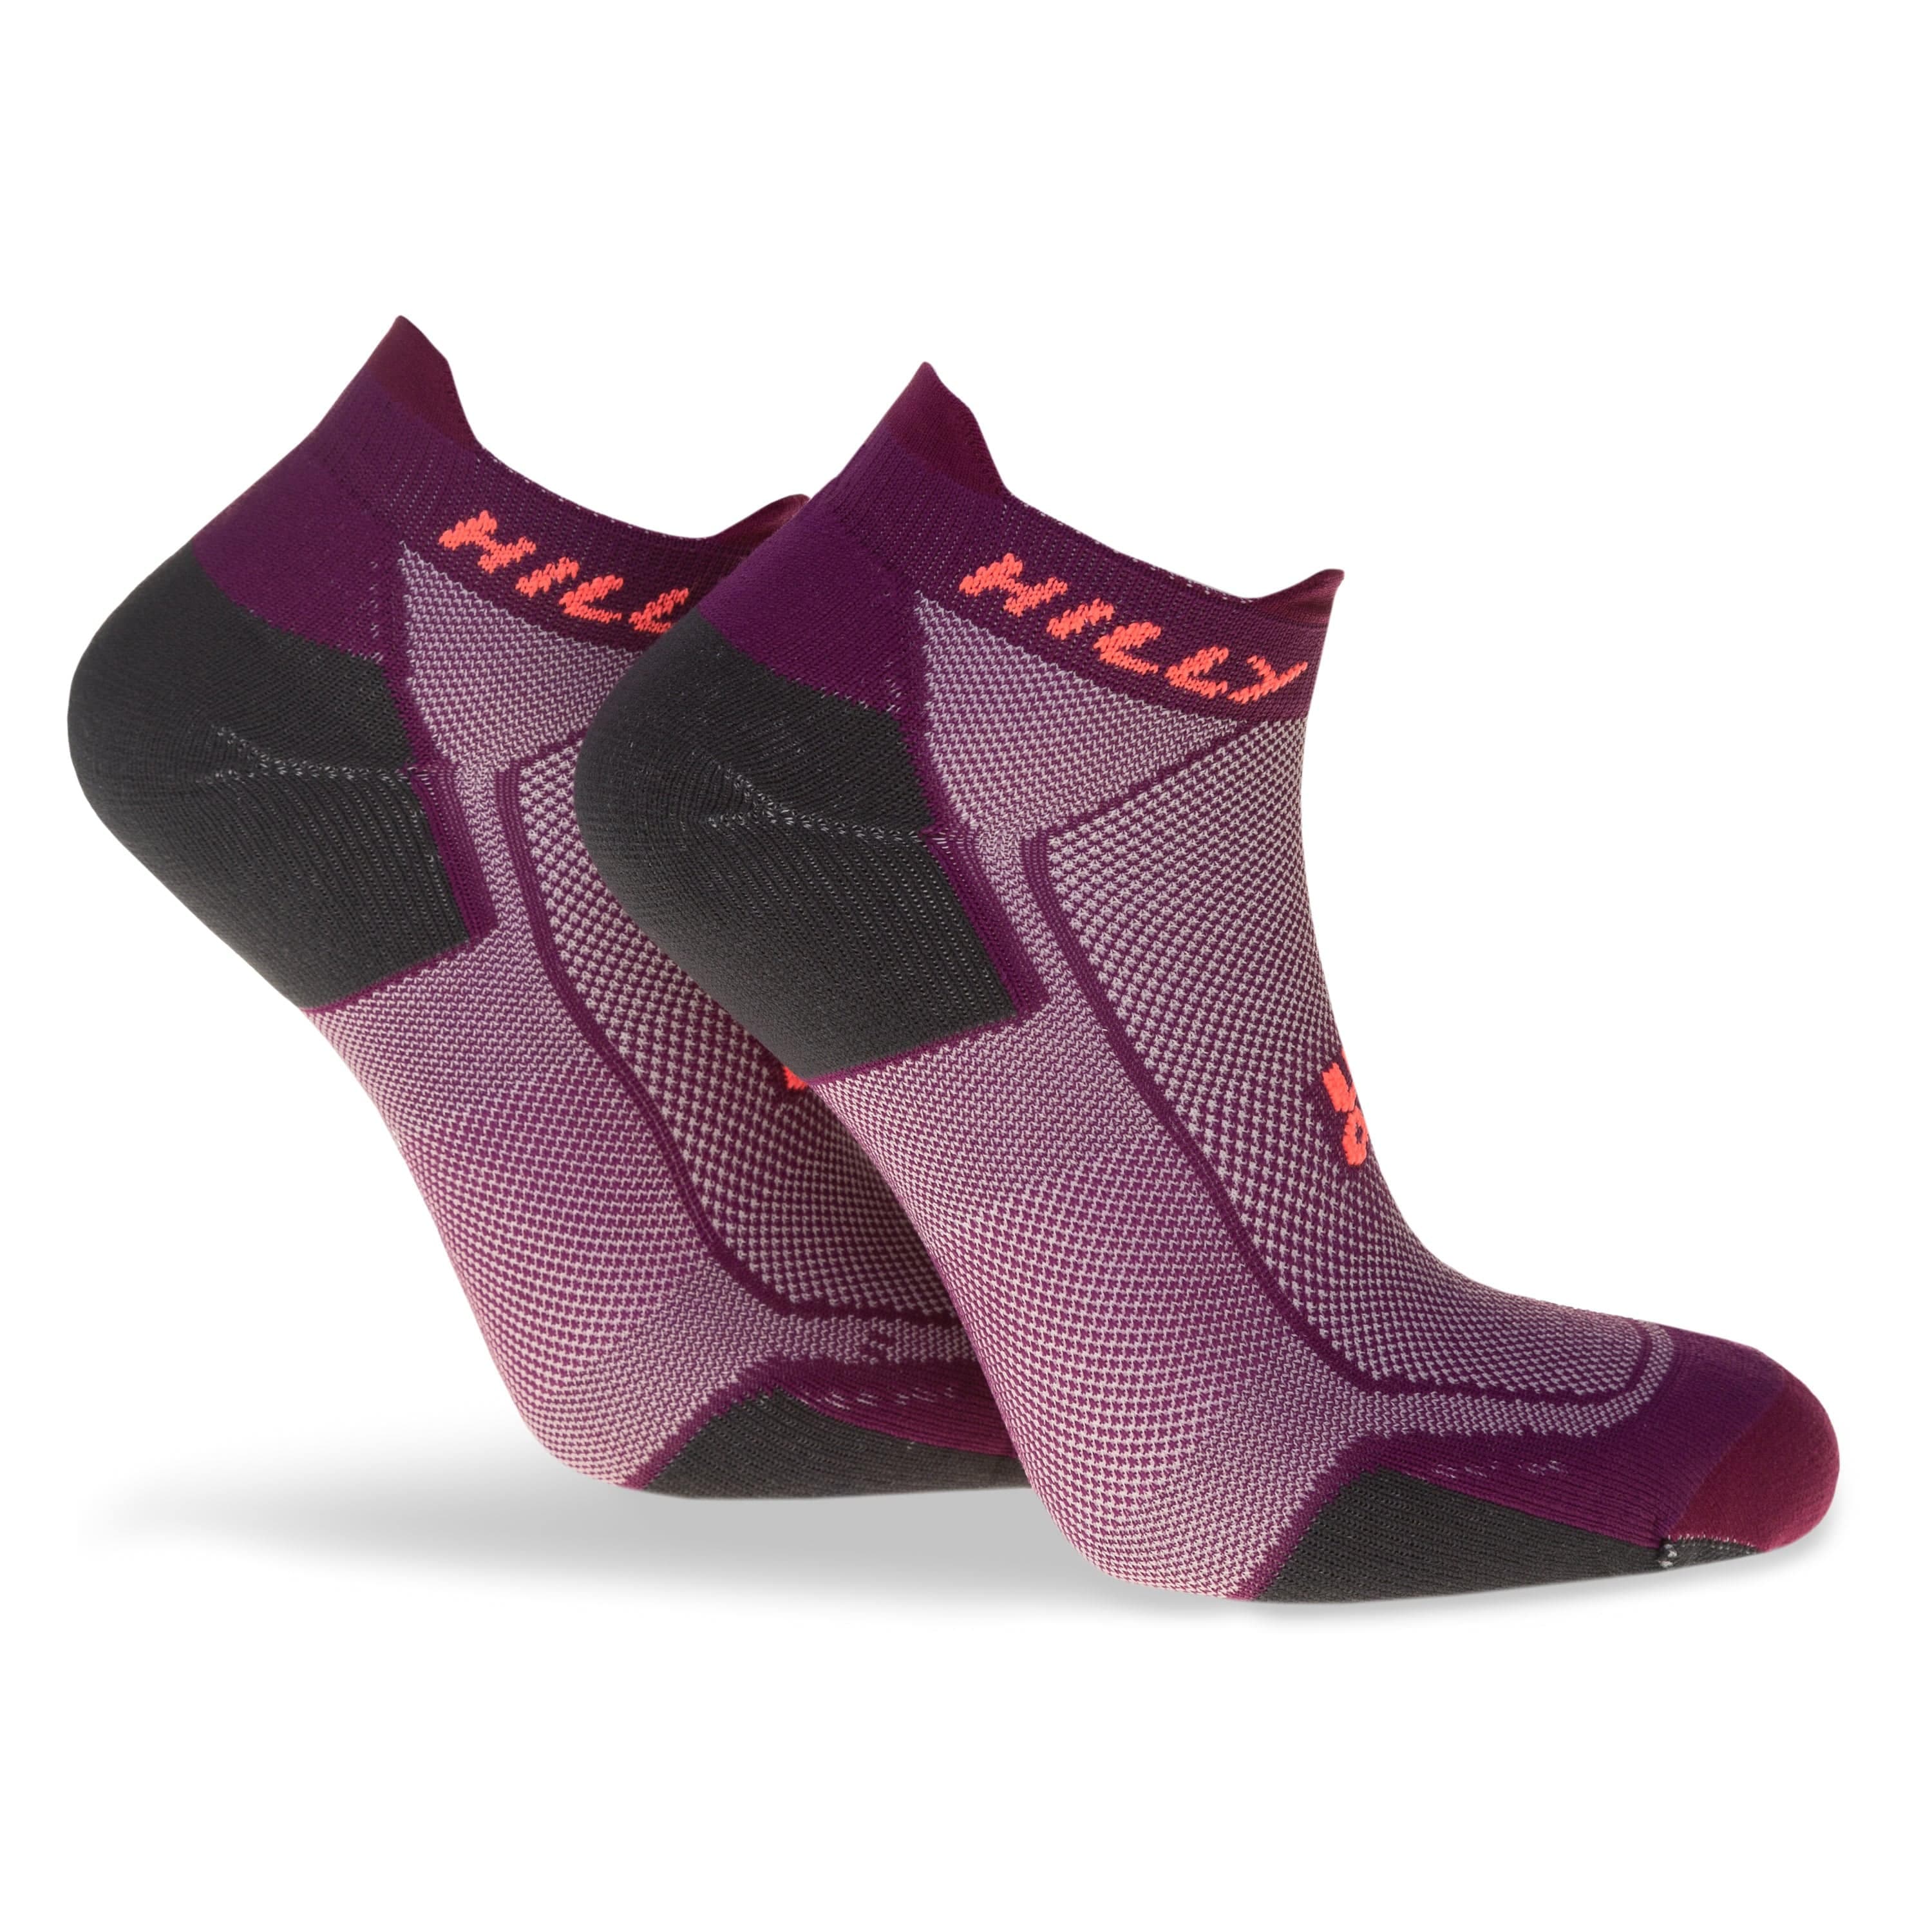 Hilly Women's Active Socklet Minimum Cushioning - Grape Juice/Charcoal